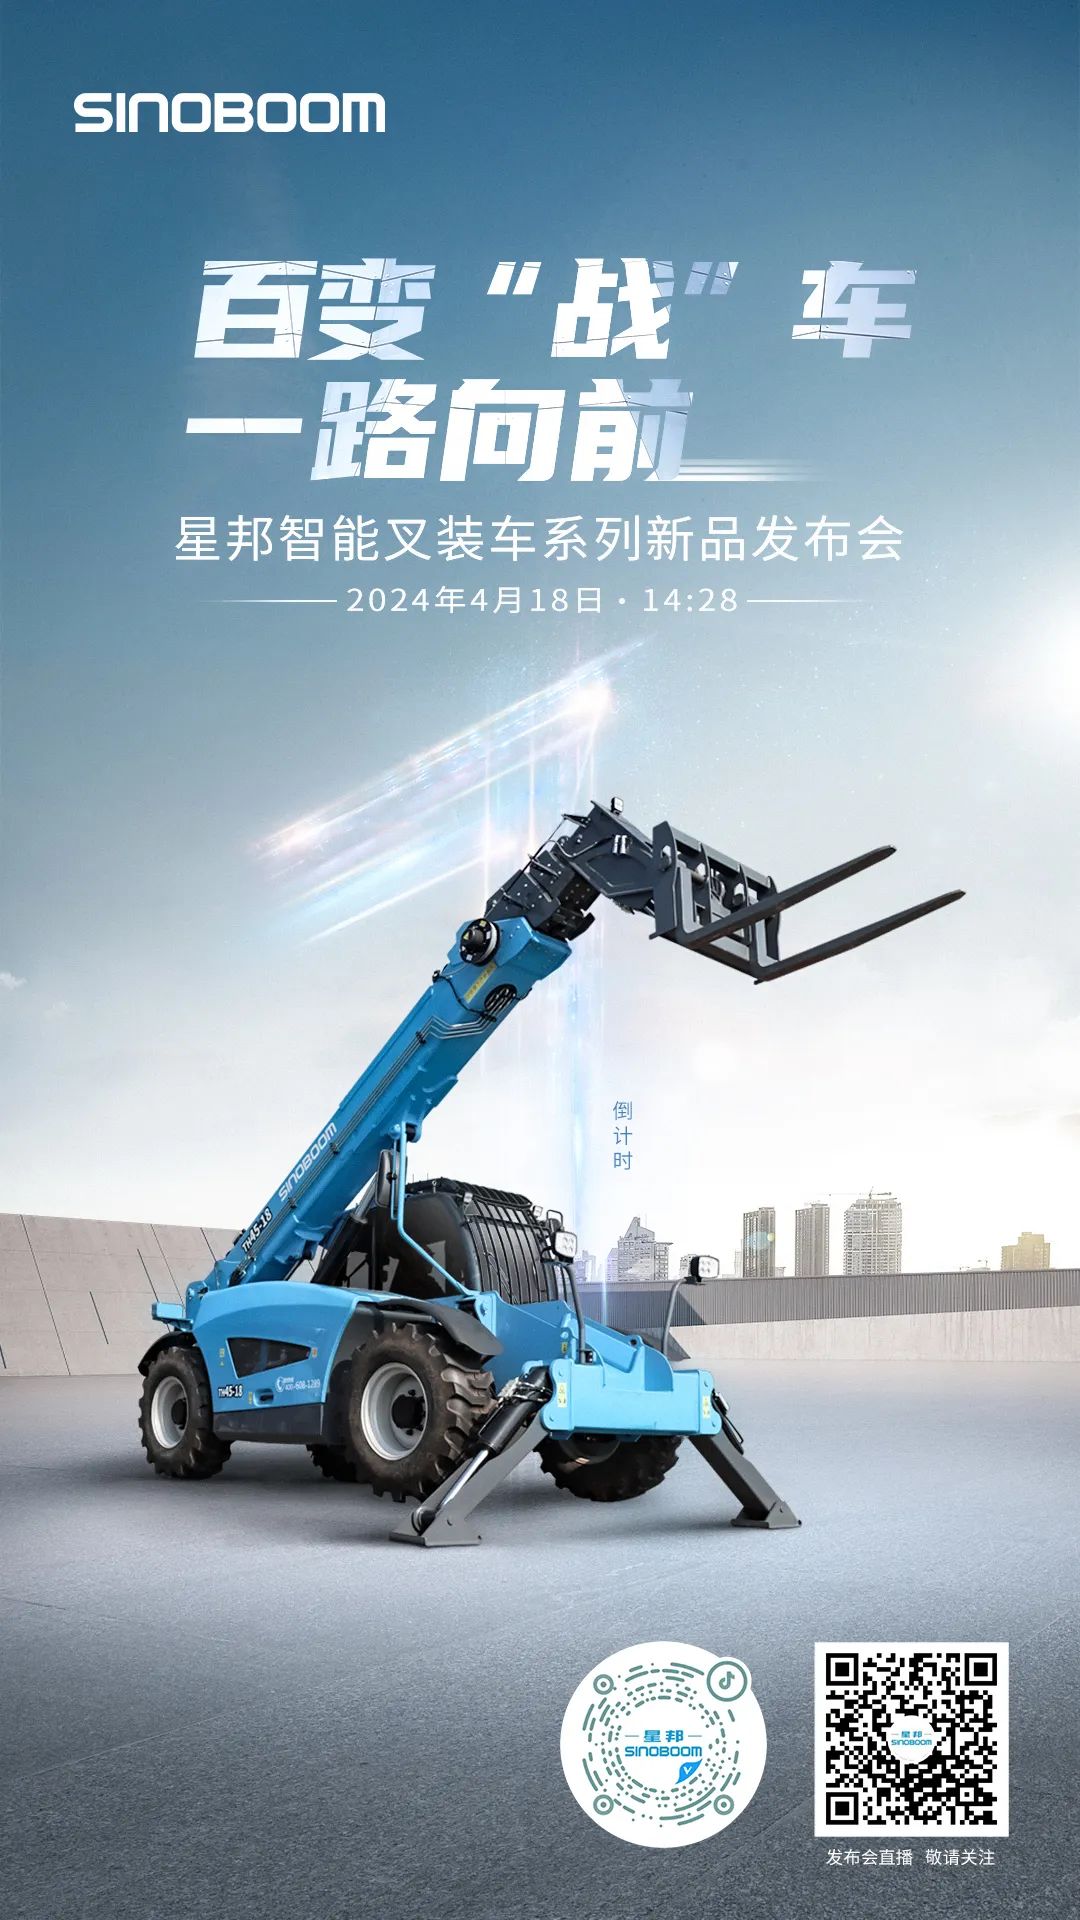 Lock in tomorrow at 14:28, the new product of Xingbang Smart Forklift Truck will be released, and you are invited to witness!